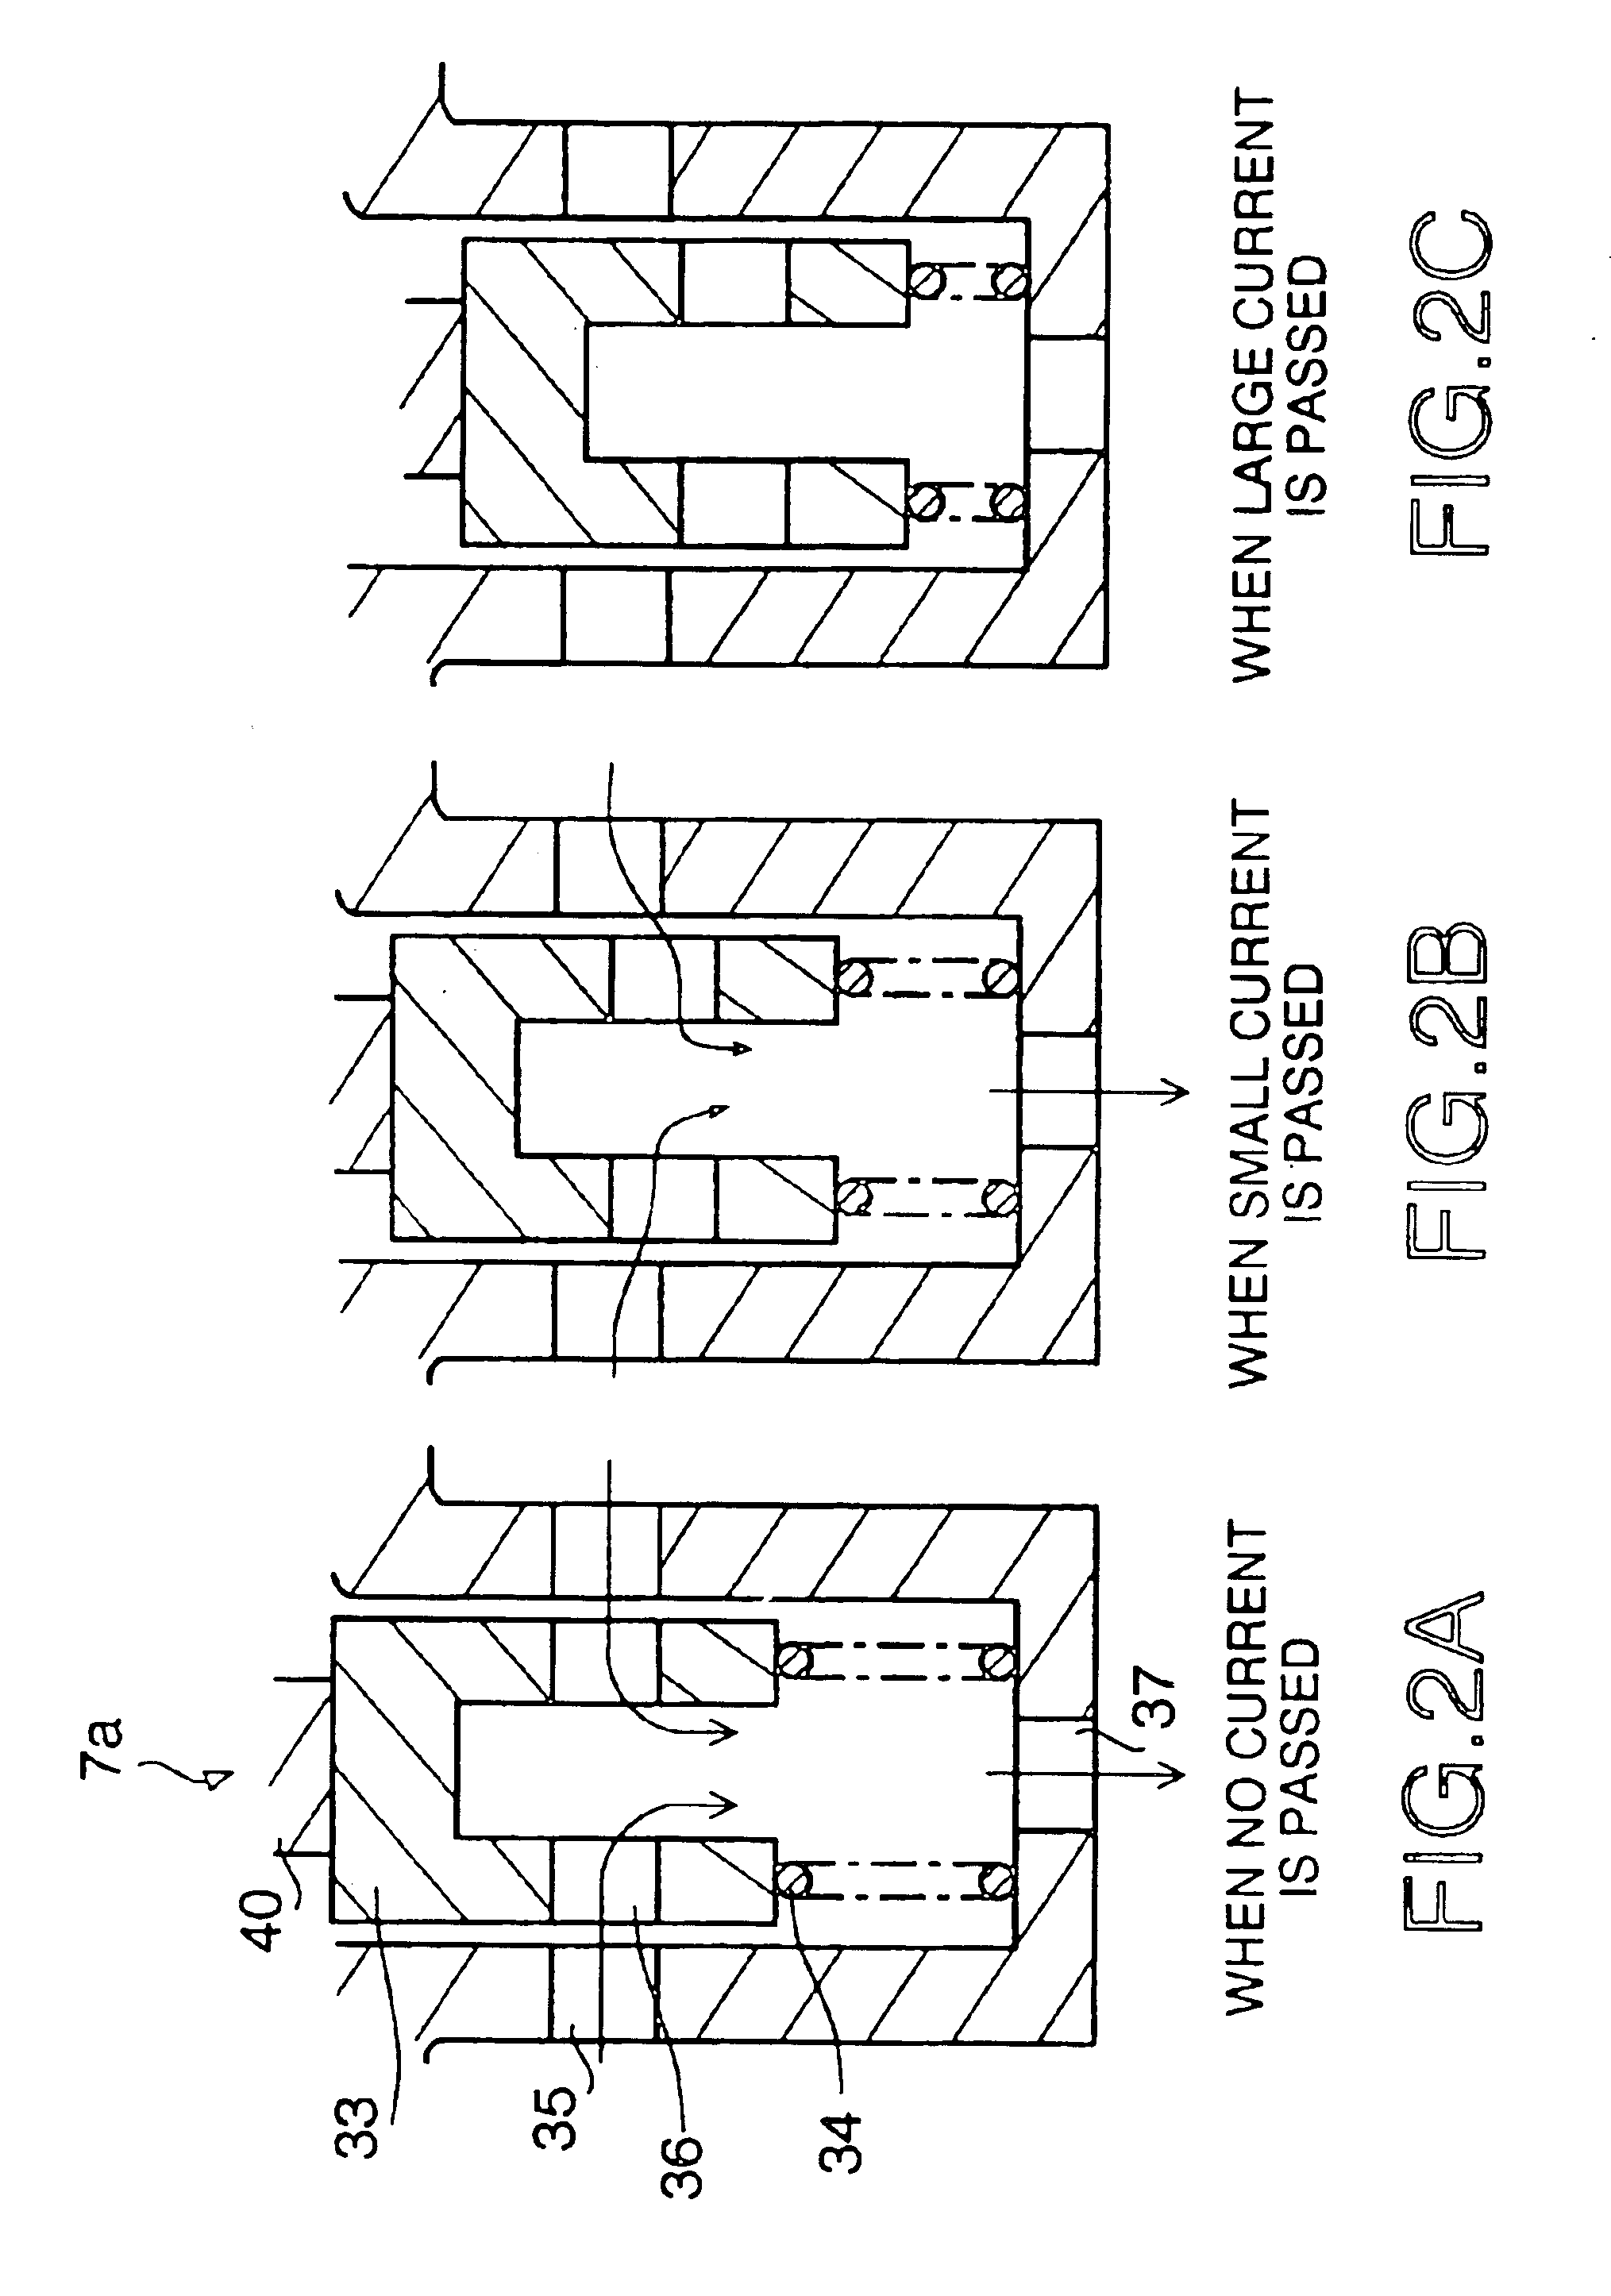 Common rail fuel injection control device